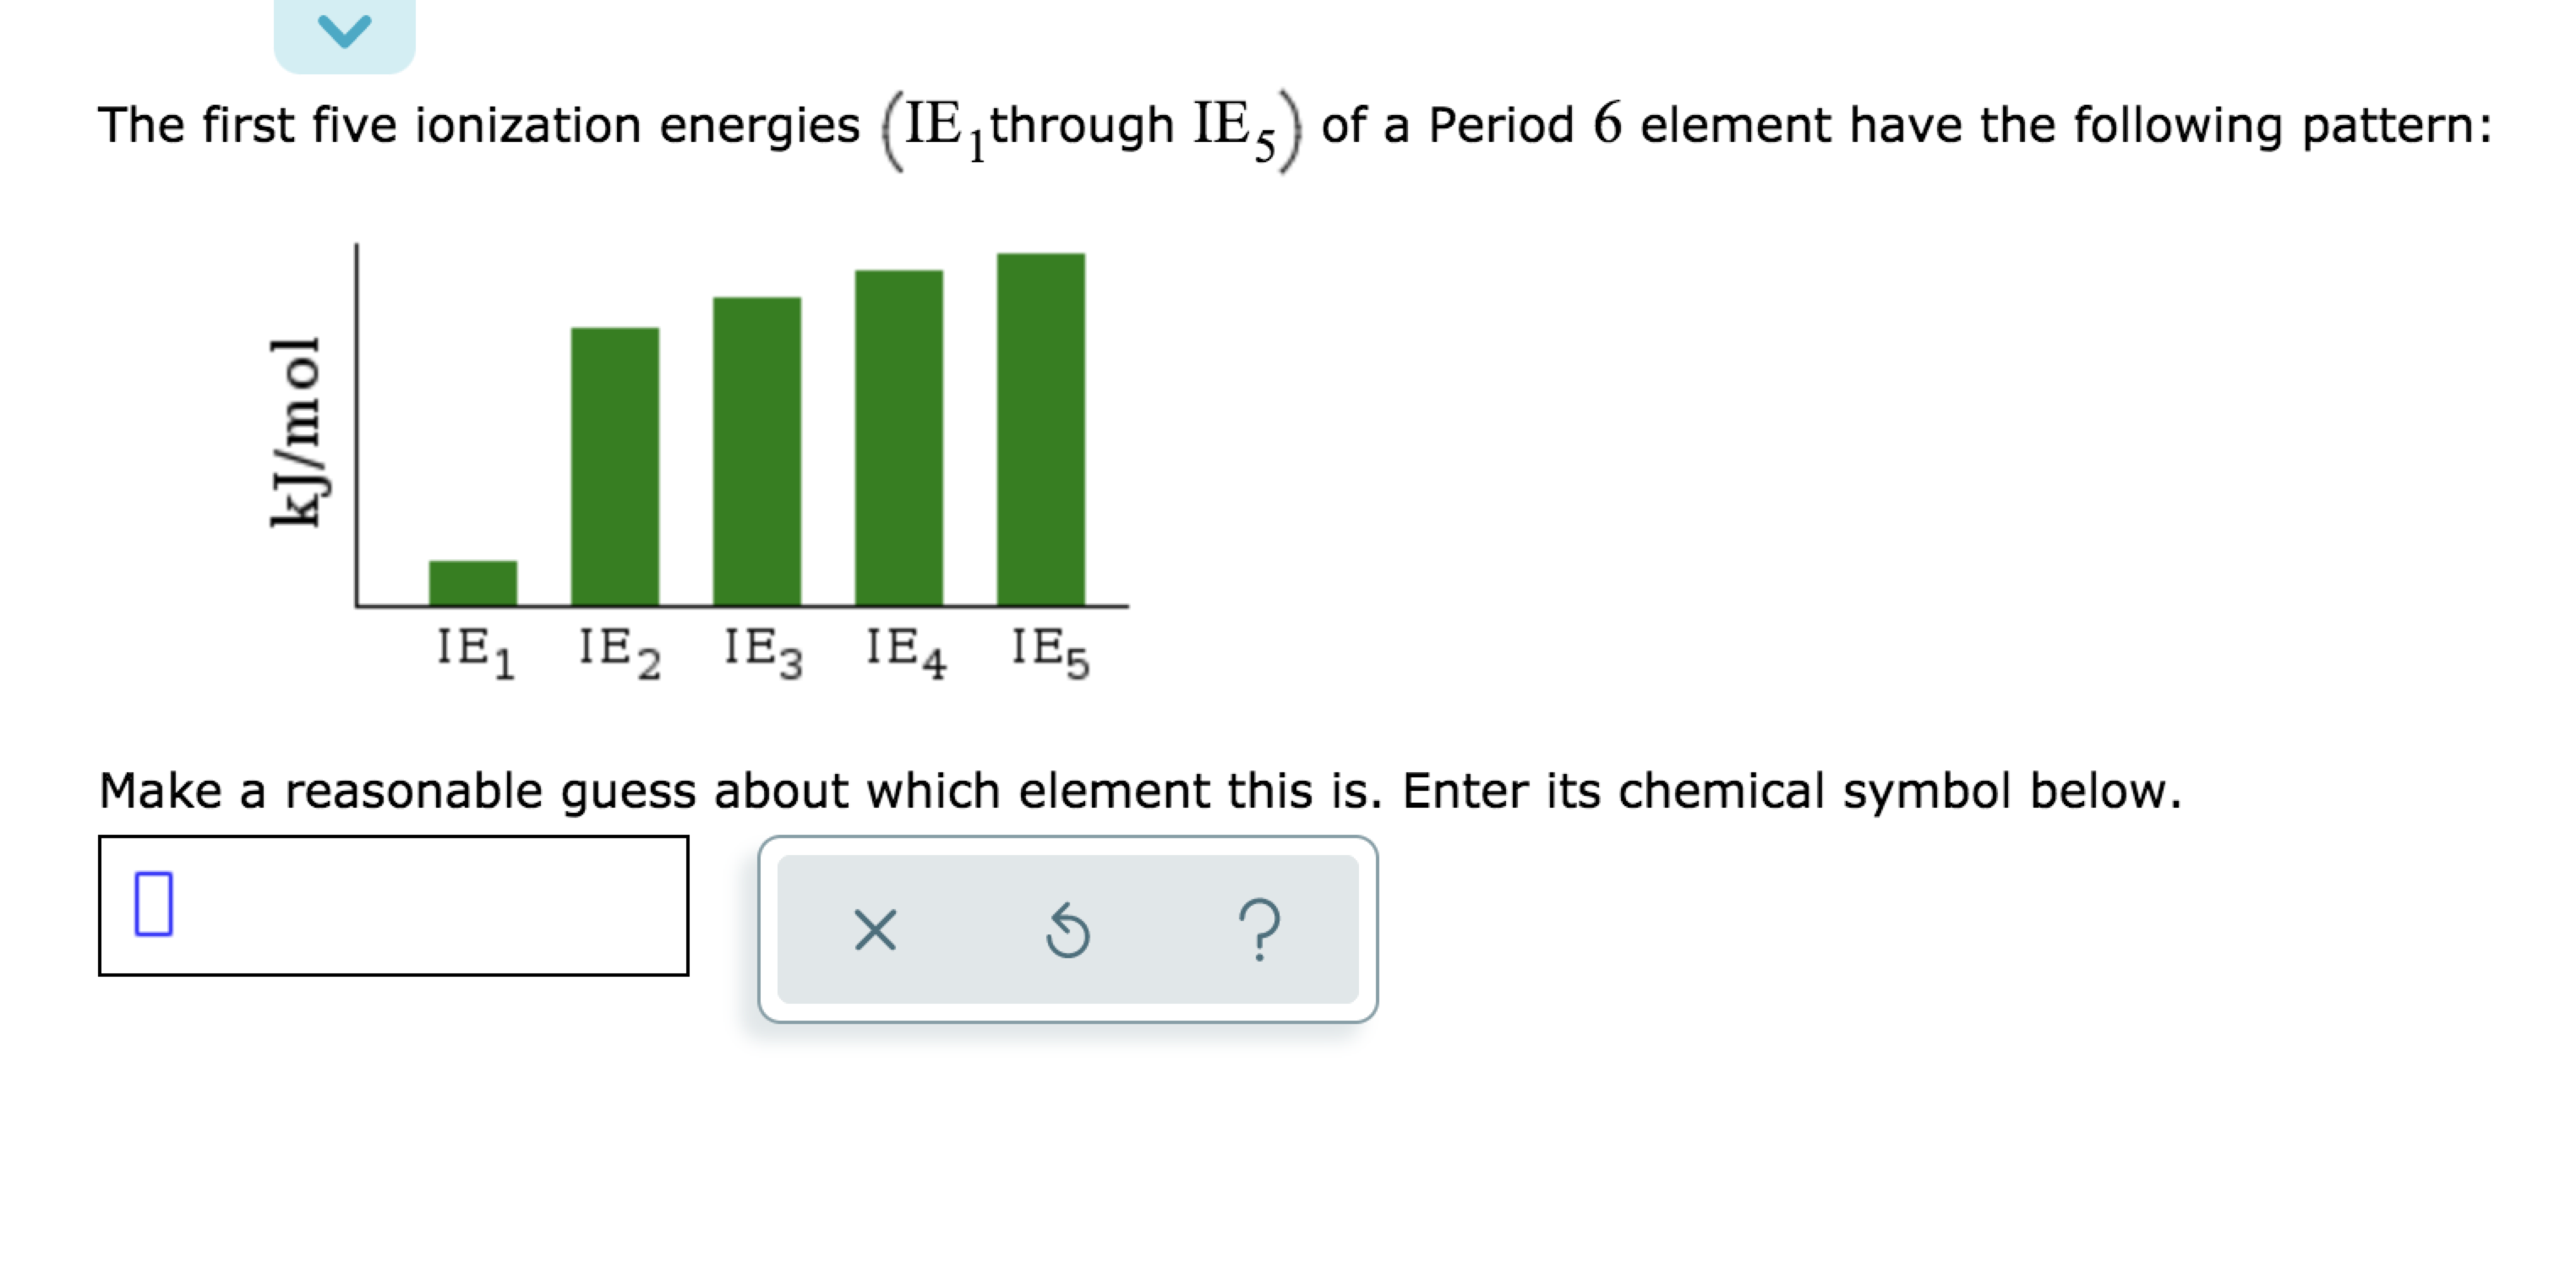 The first five ionization energies (IE, through IEs) of a Period 6 element have the following patte
IE, IE, IE3 IE4 IE5
kJ/mol
